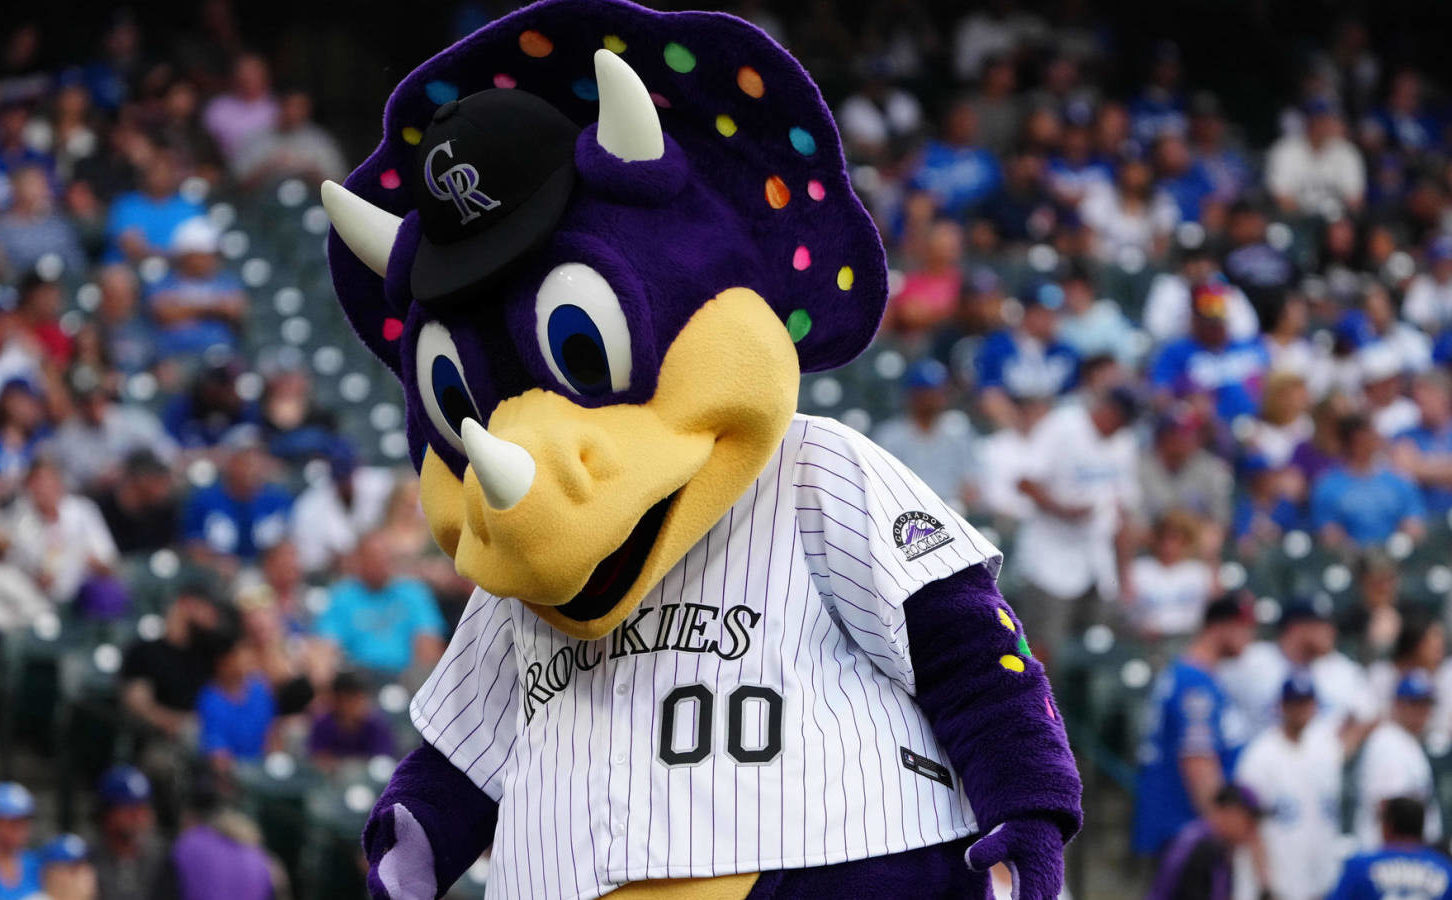 Why do Colorado Rockies fans keep paying to watch a loser?